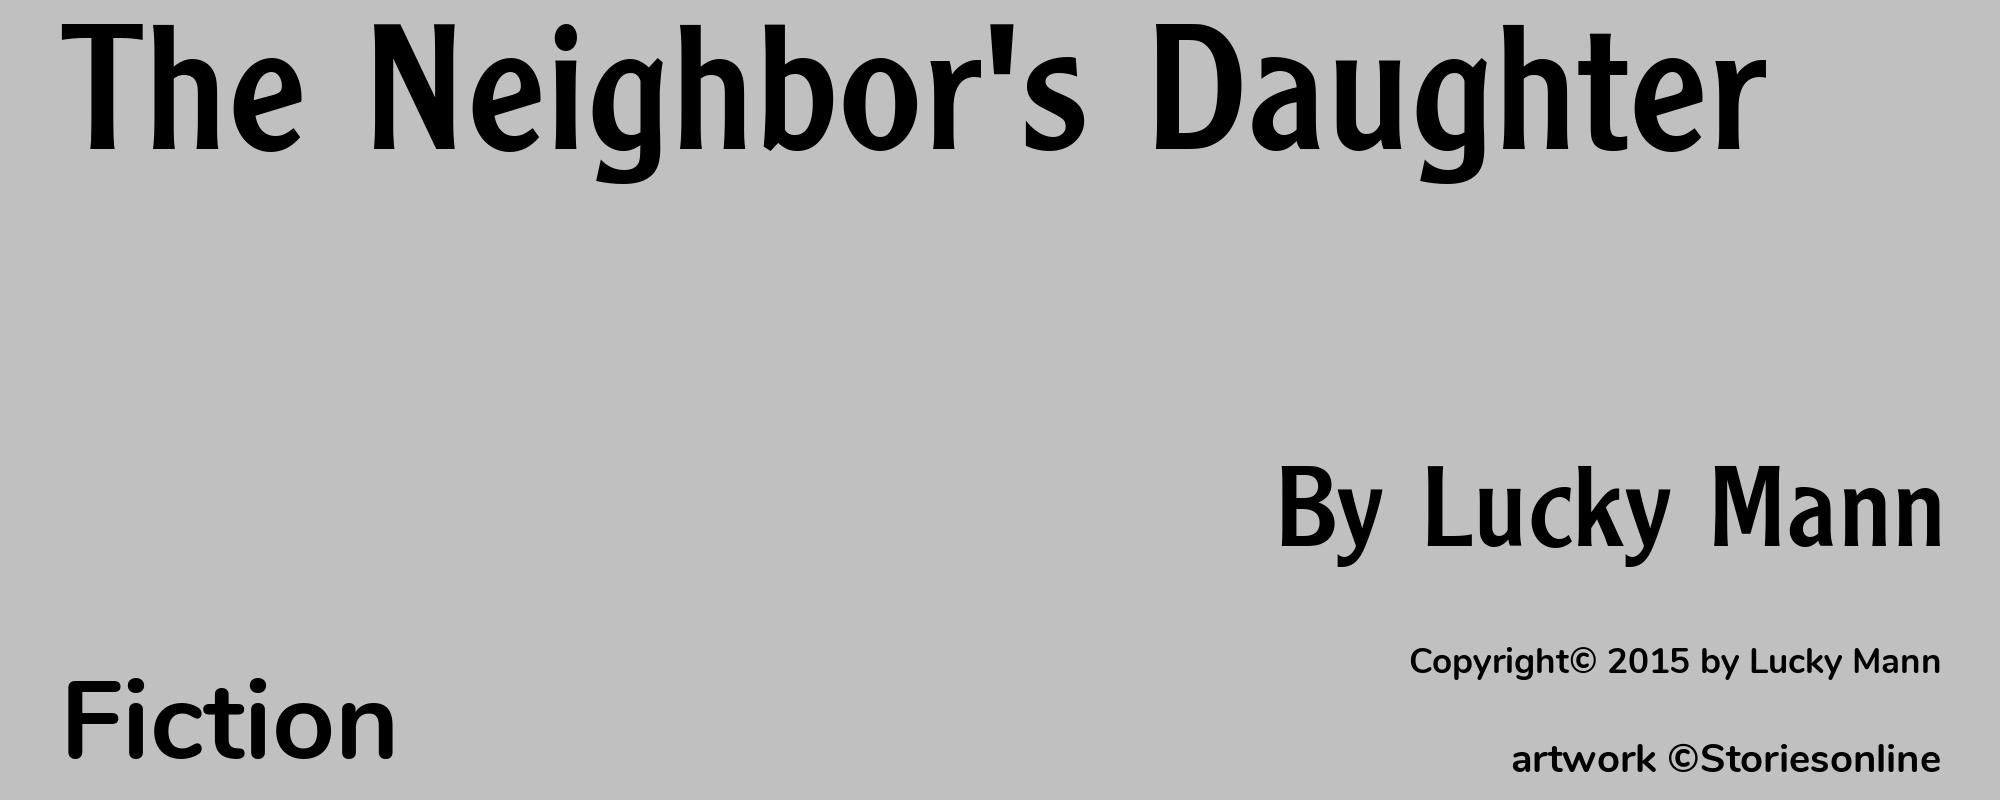 The Neighbor's Daughter - Cover